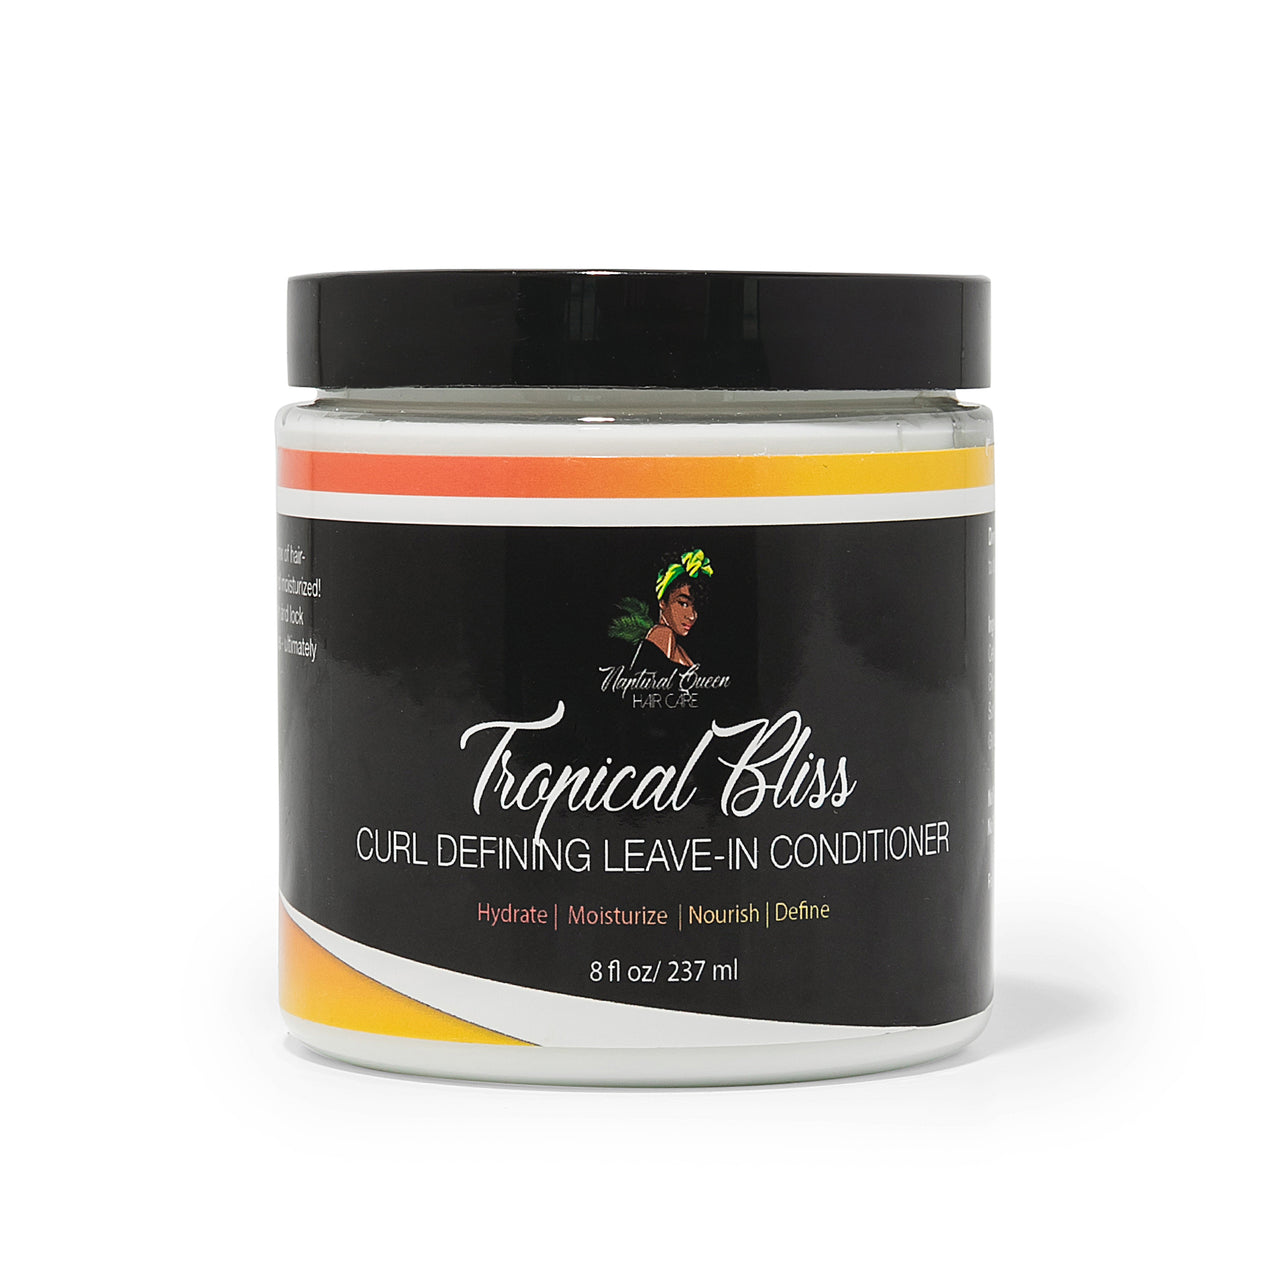 Tropical Bliss Curl Defining Leave-in Conditioner